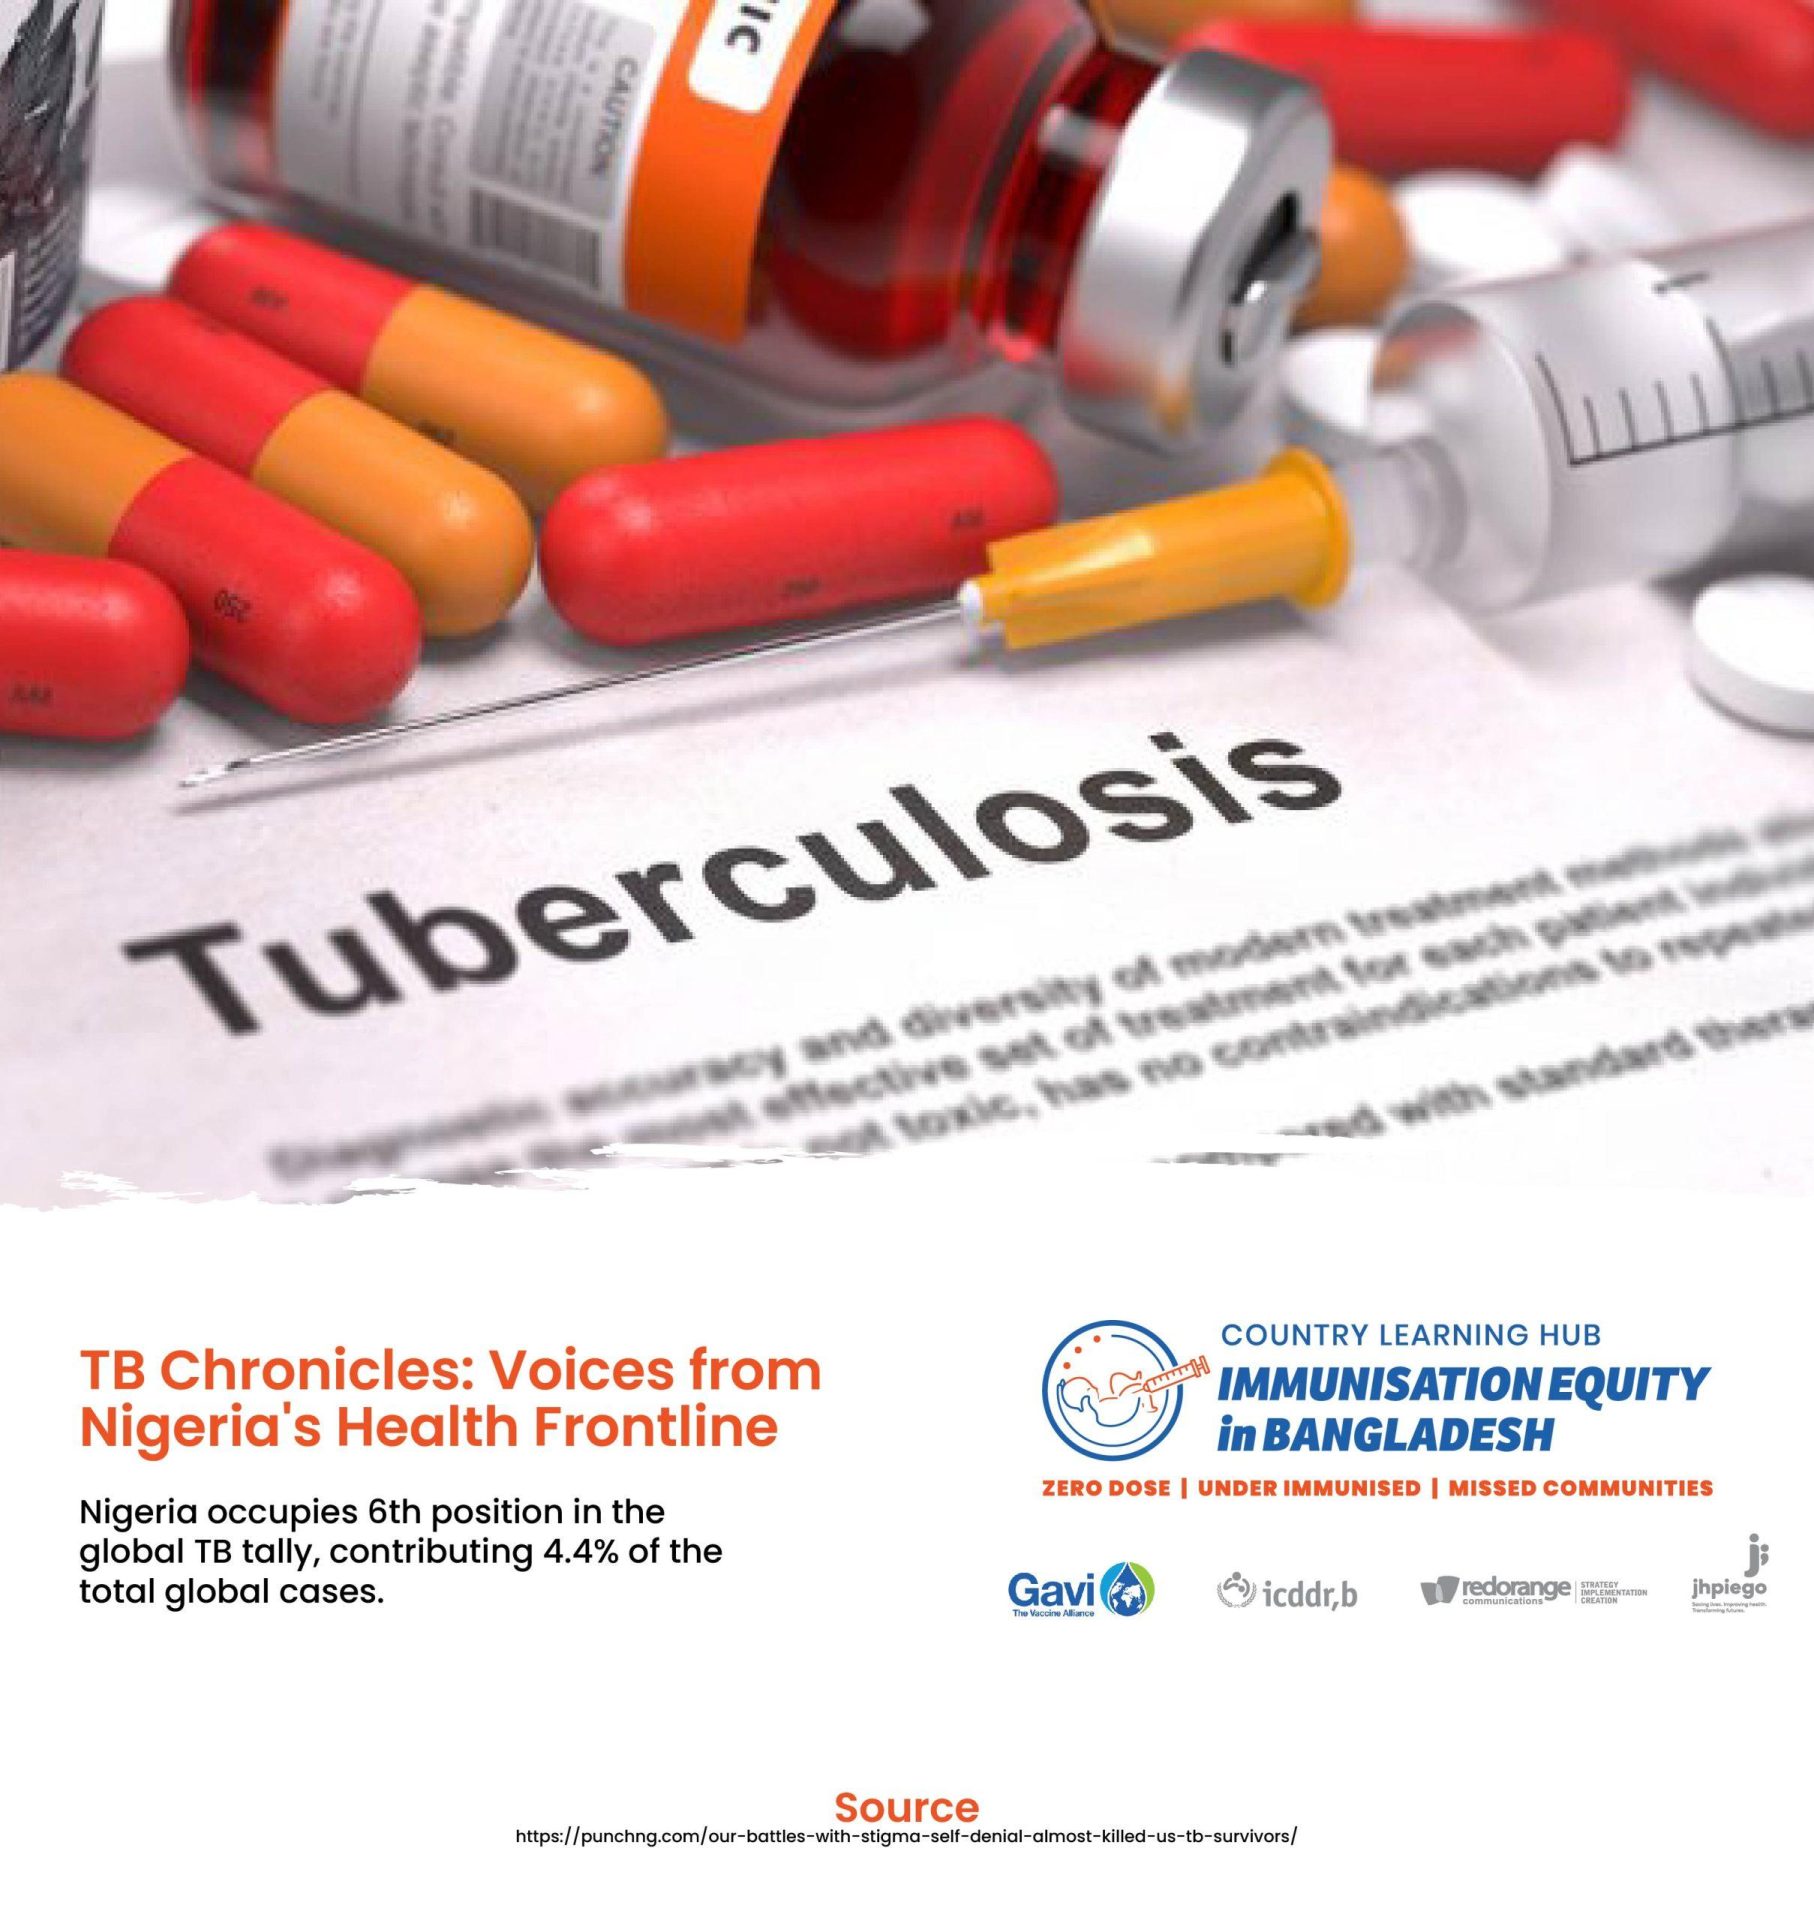 TB Chronicles: Voices from Nigeria’s Health Frontline